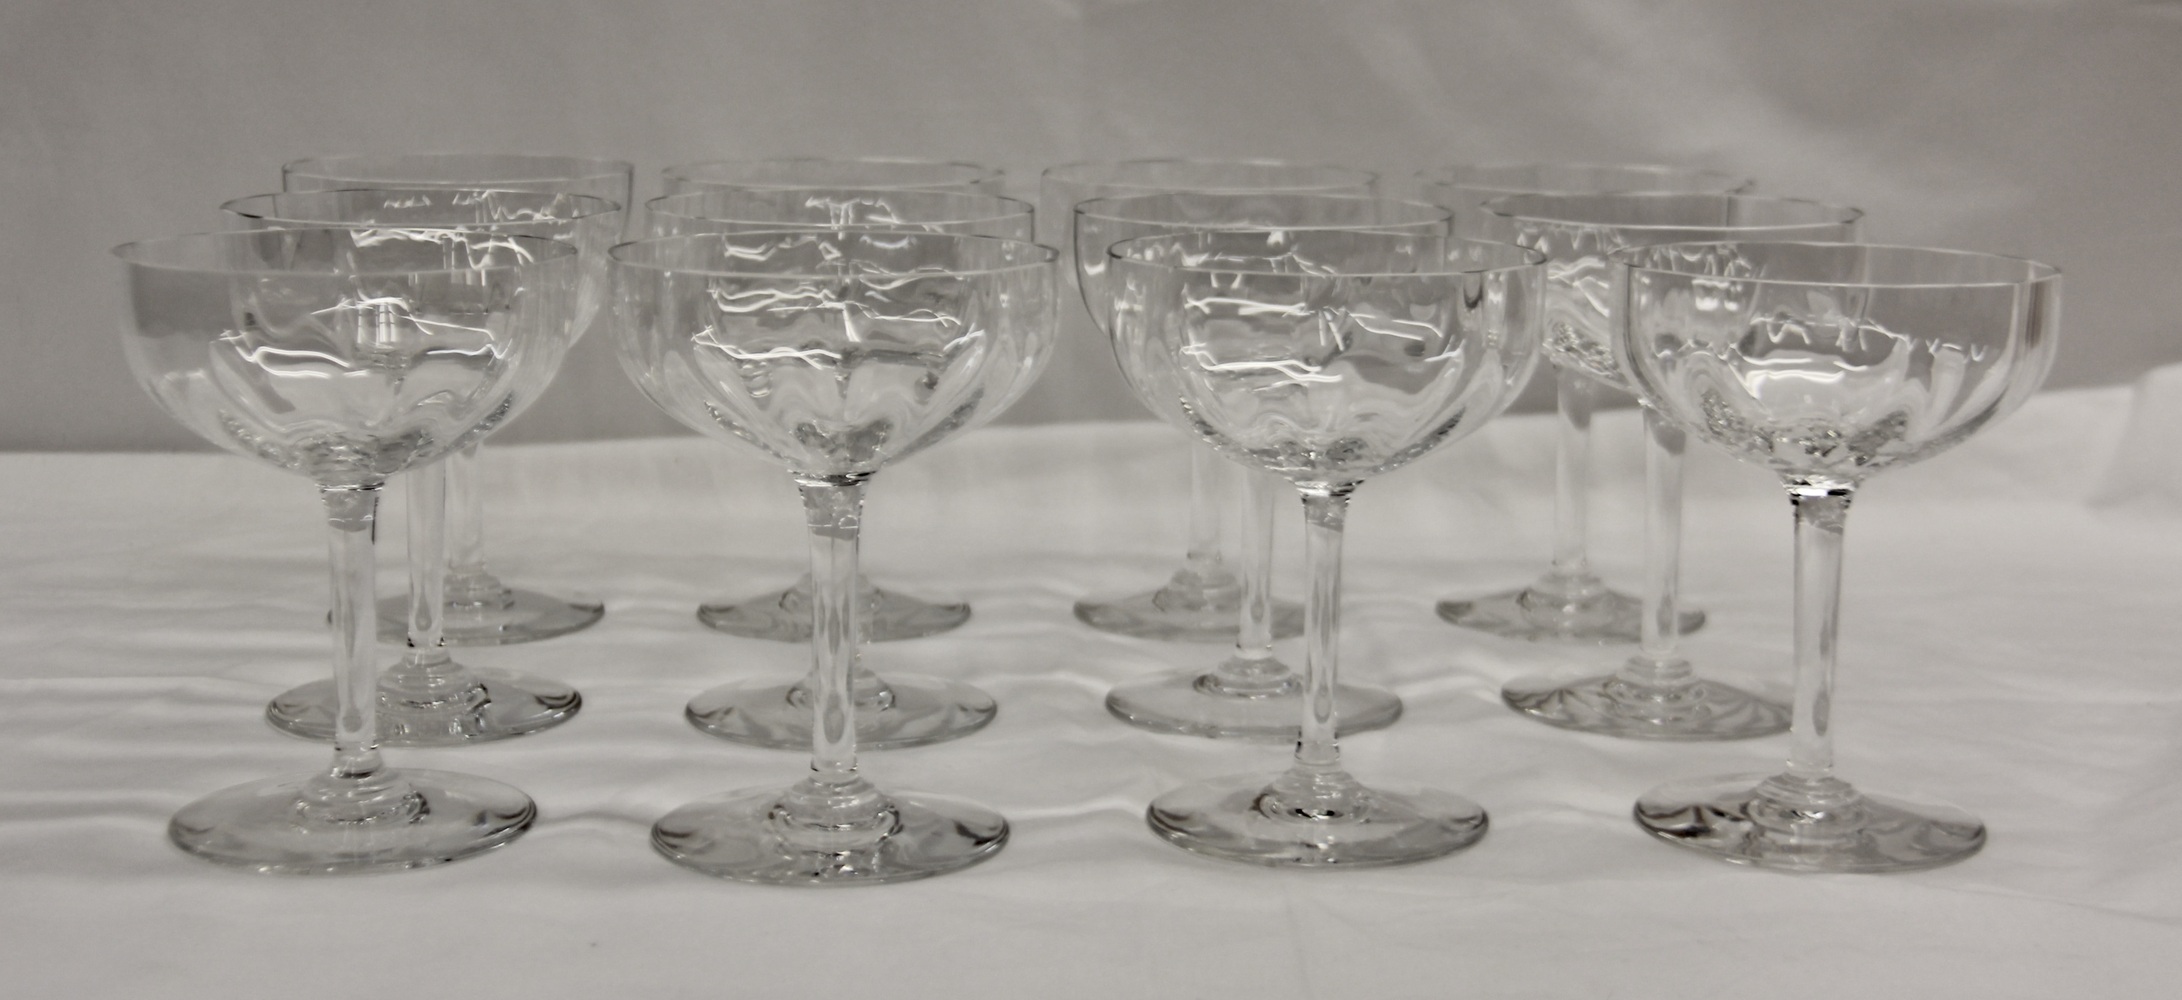 MINT Vintage 1970's Crystal Baccarat Coupe Champagne Glasses 